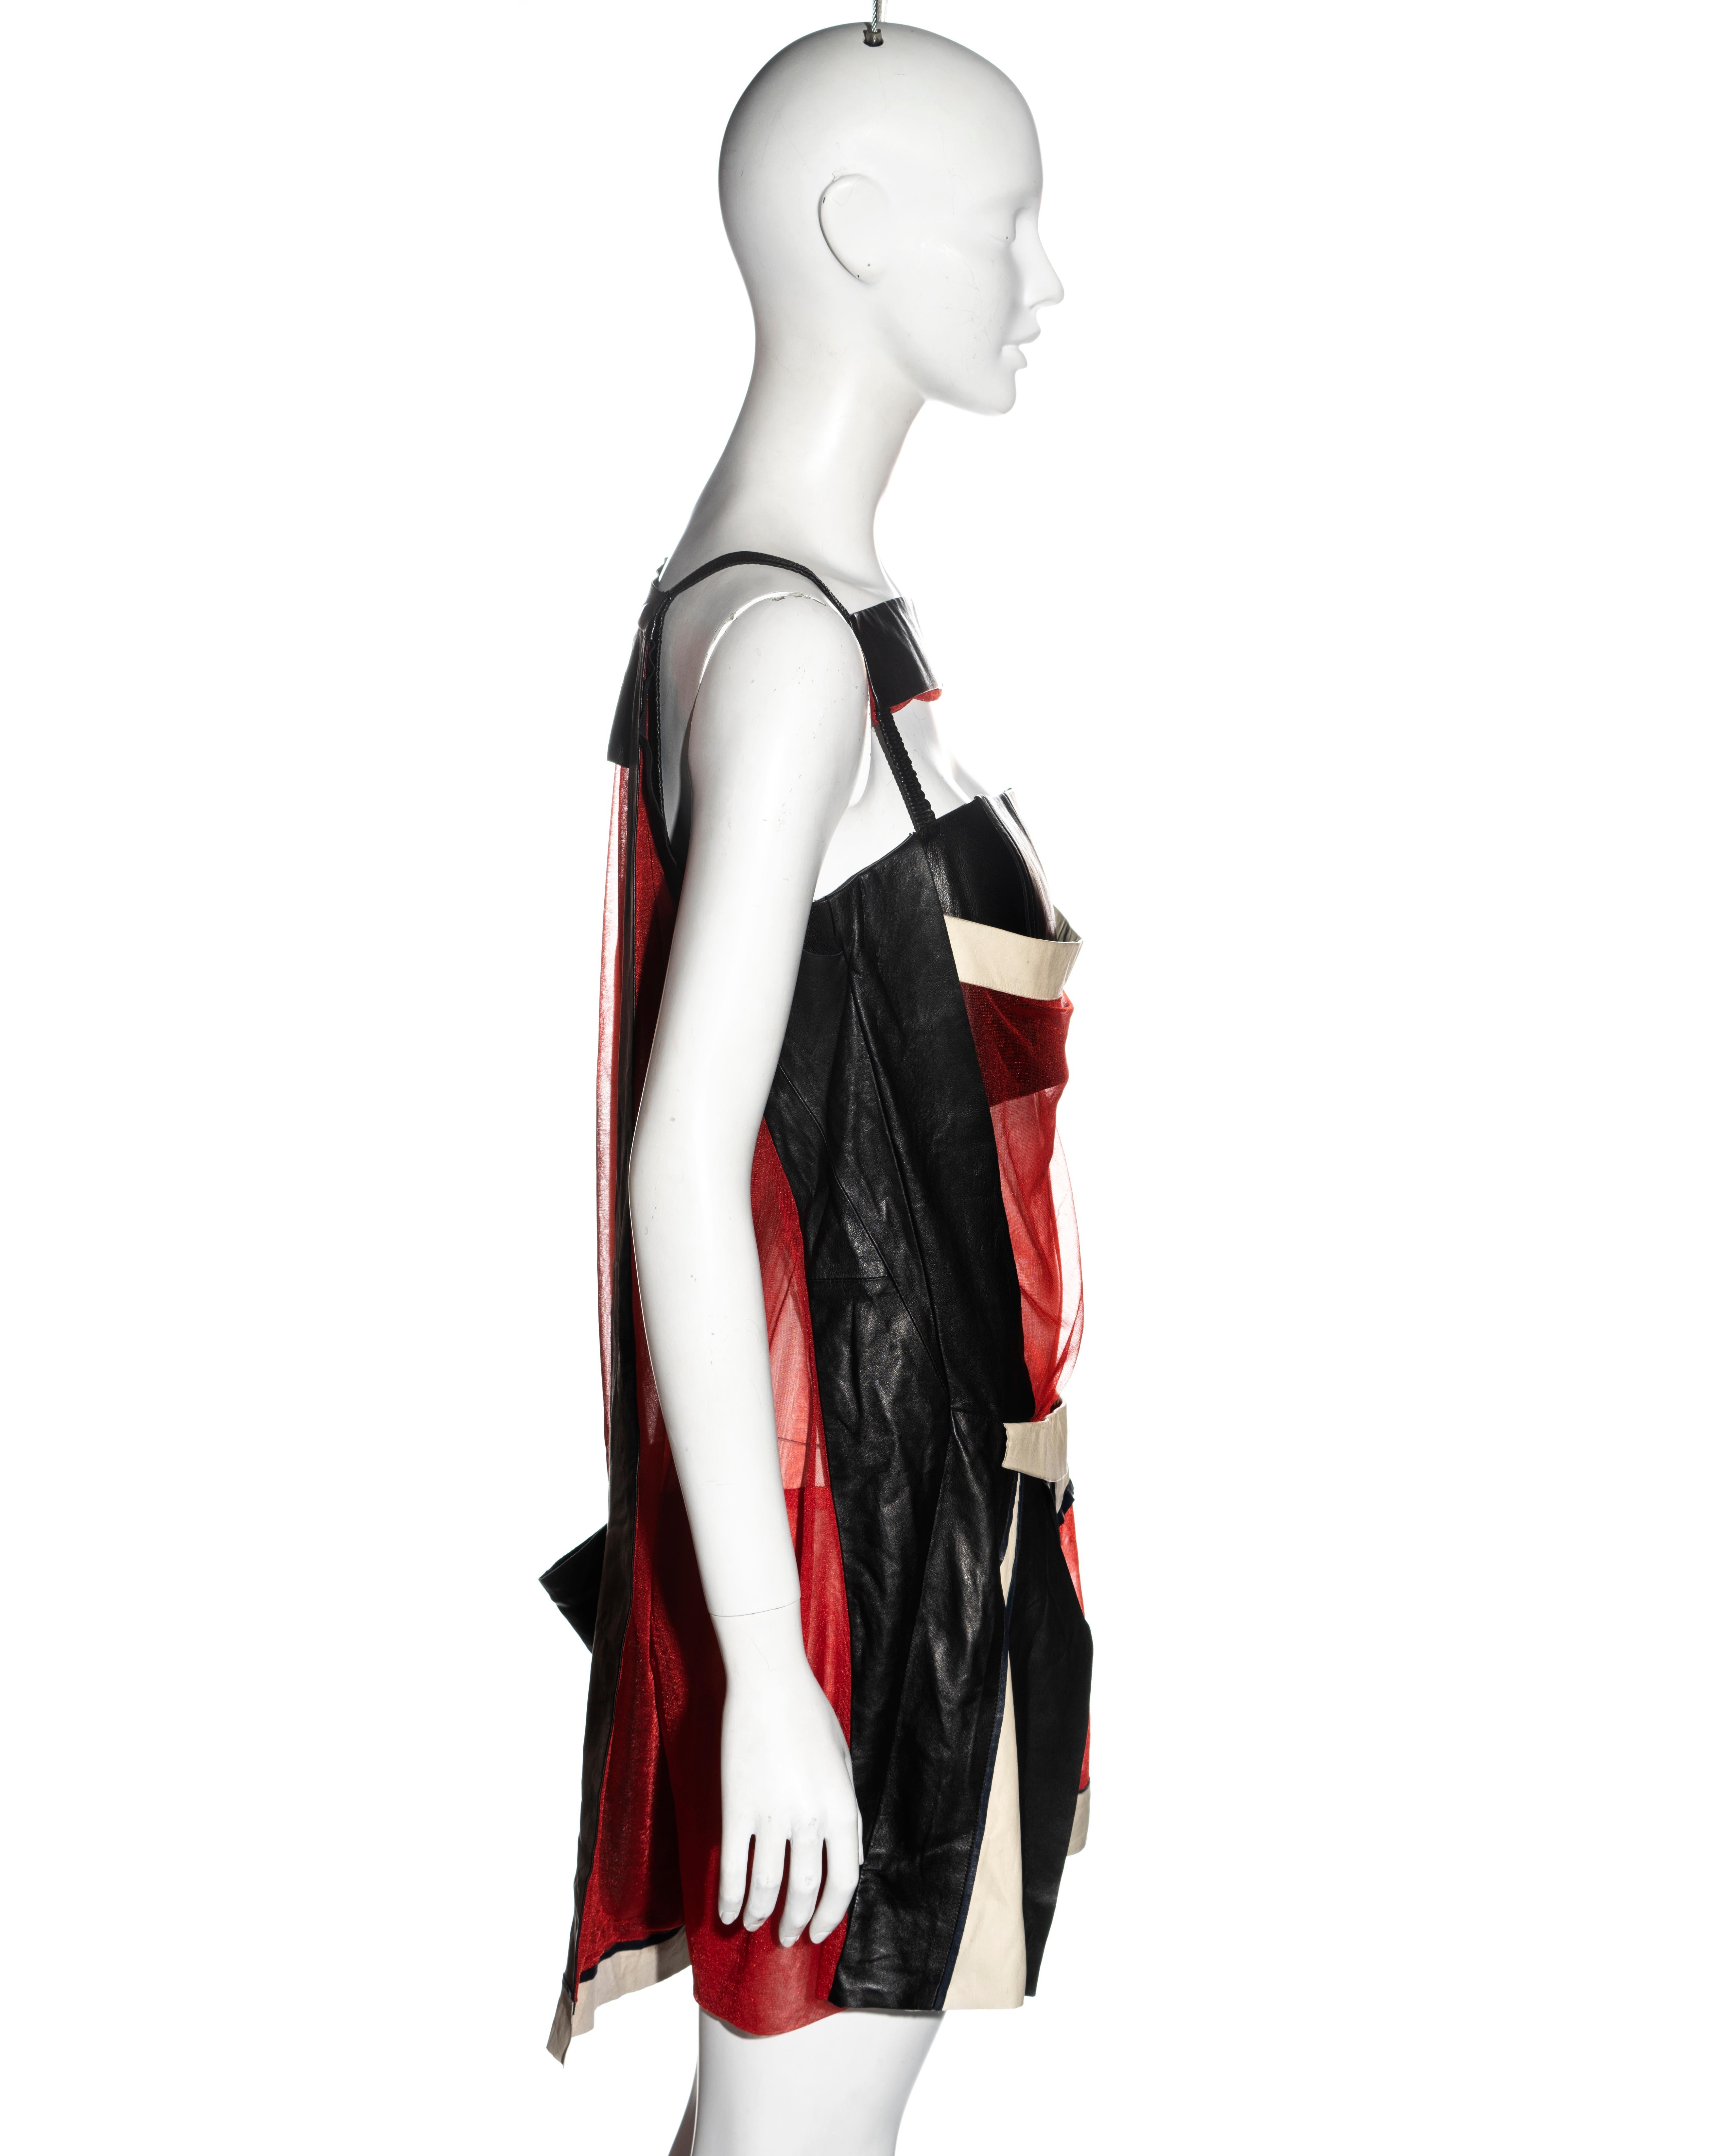 Balenciaga by Nicolas Ghesquière black and red leather mini dress, ss 2010 For Sale 4